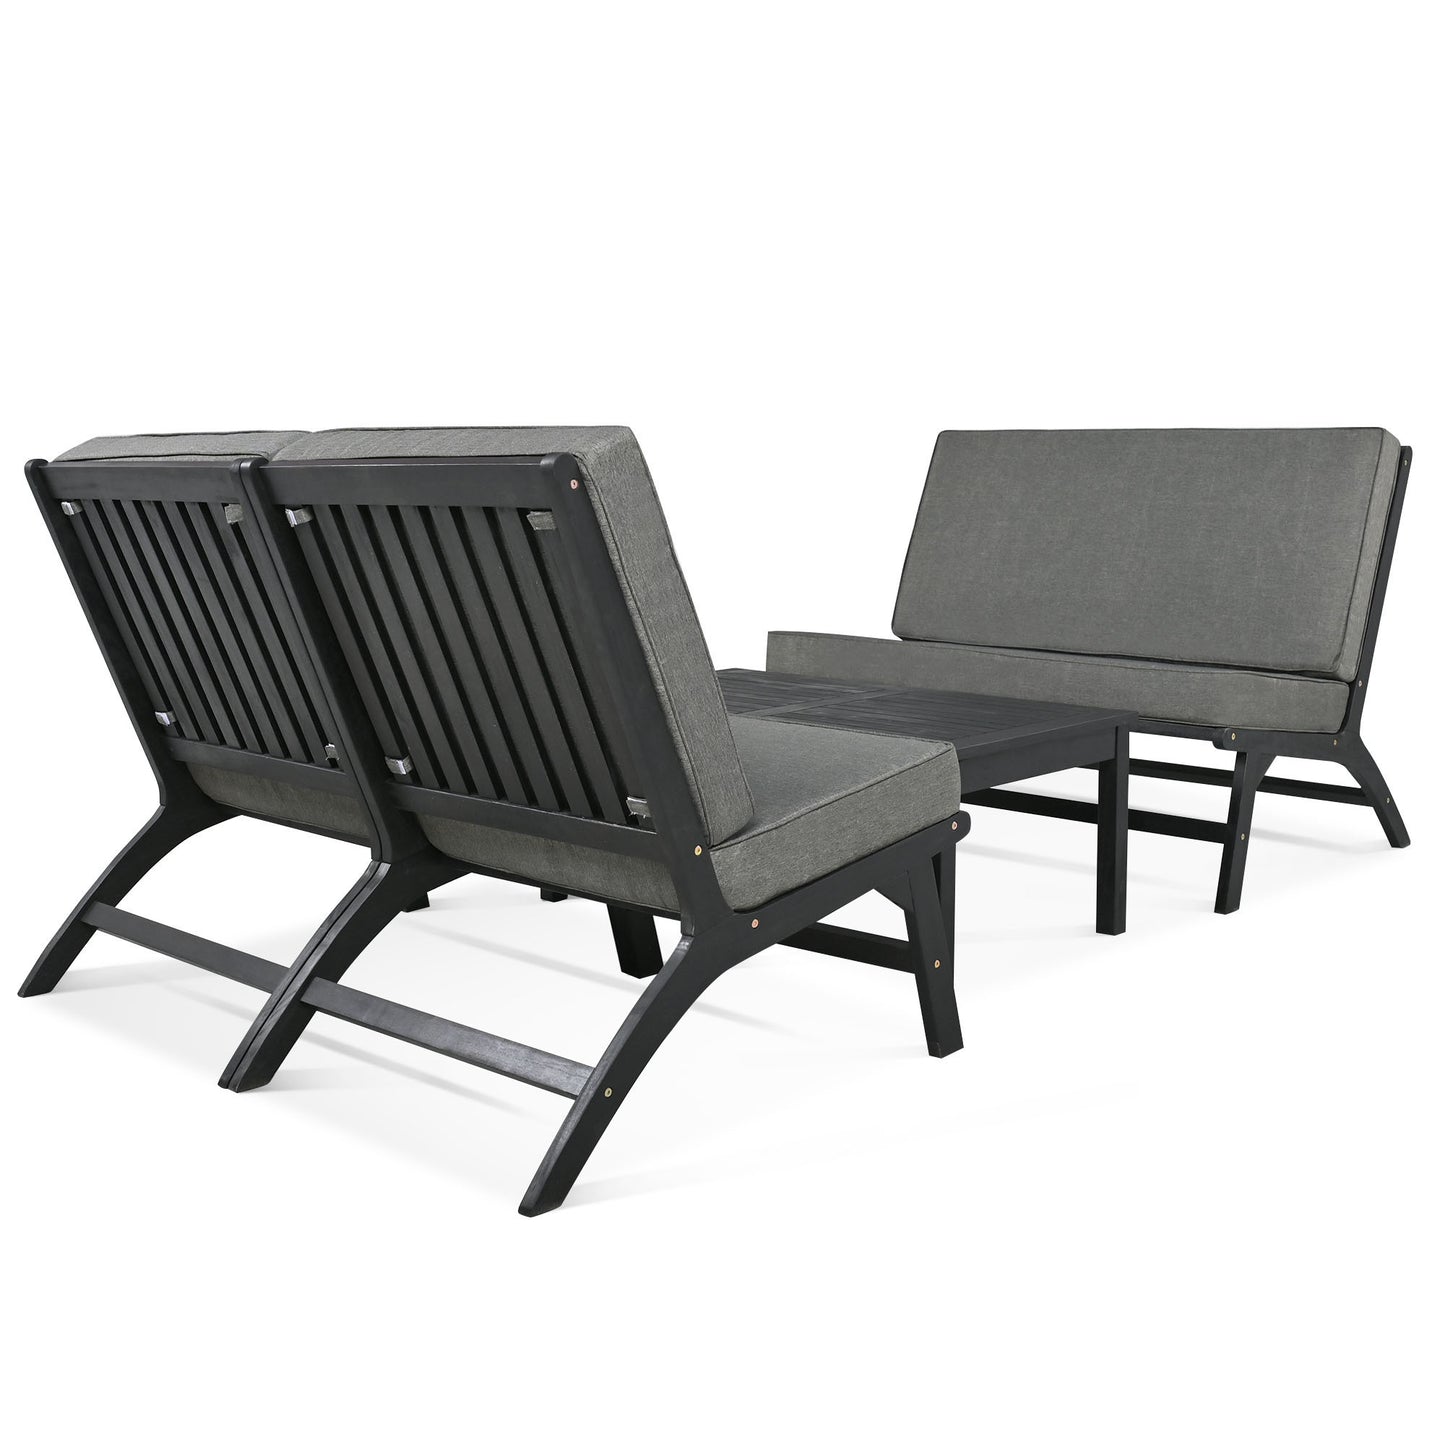 GO 4-Piece V-shaped Seats set, Acacia Solid Wood Outdoor Sofa, Garden Furniture, Outdoor seating, Black And Gray